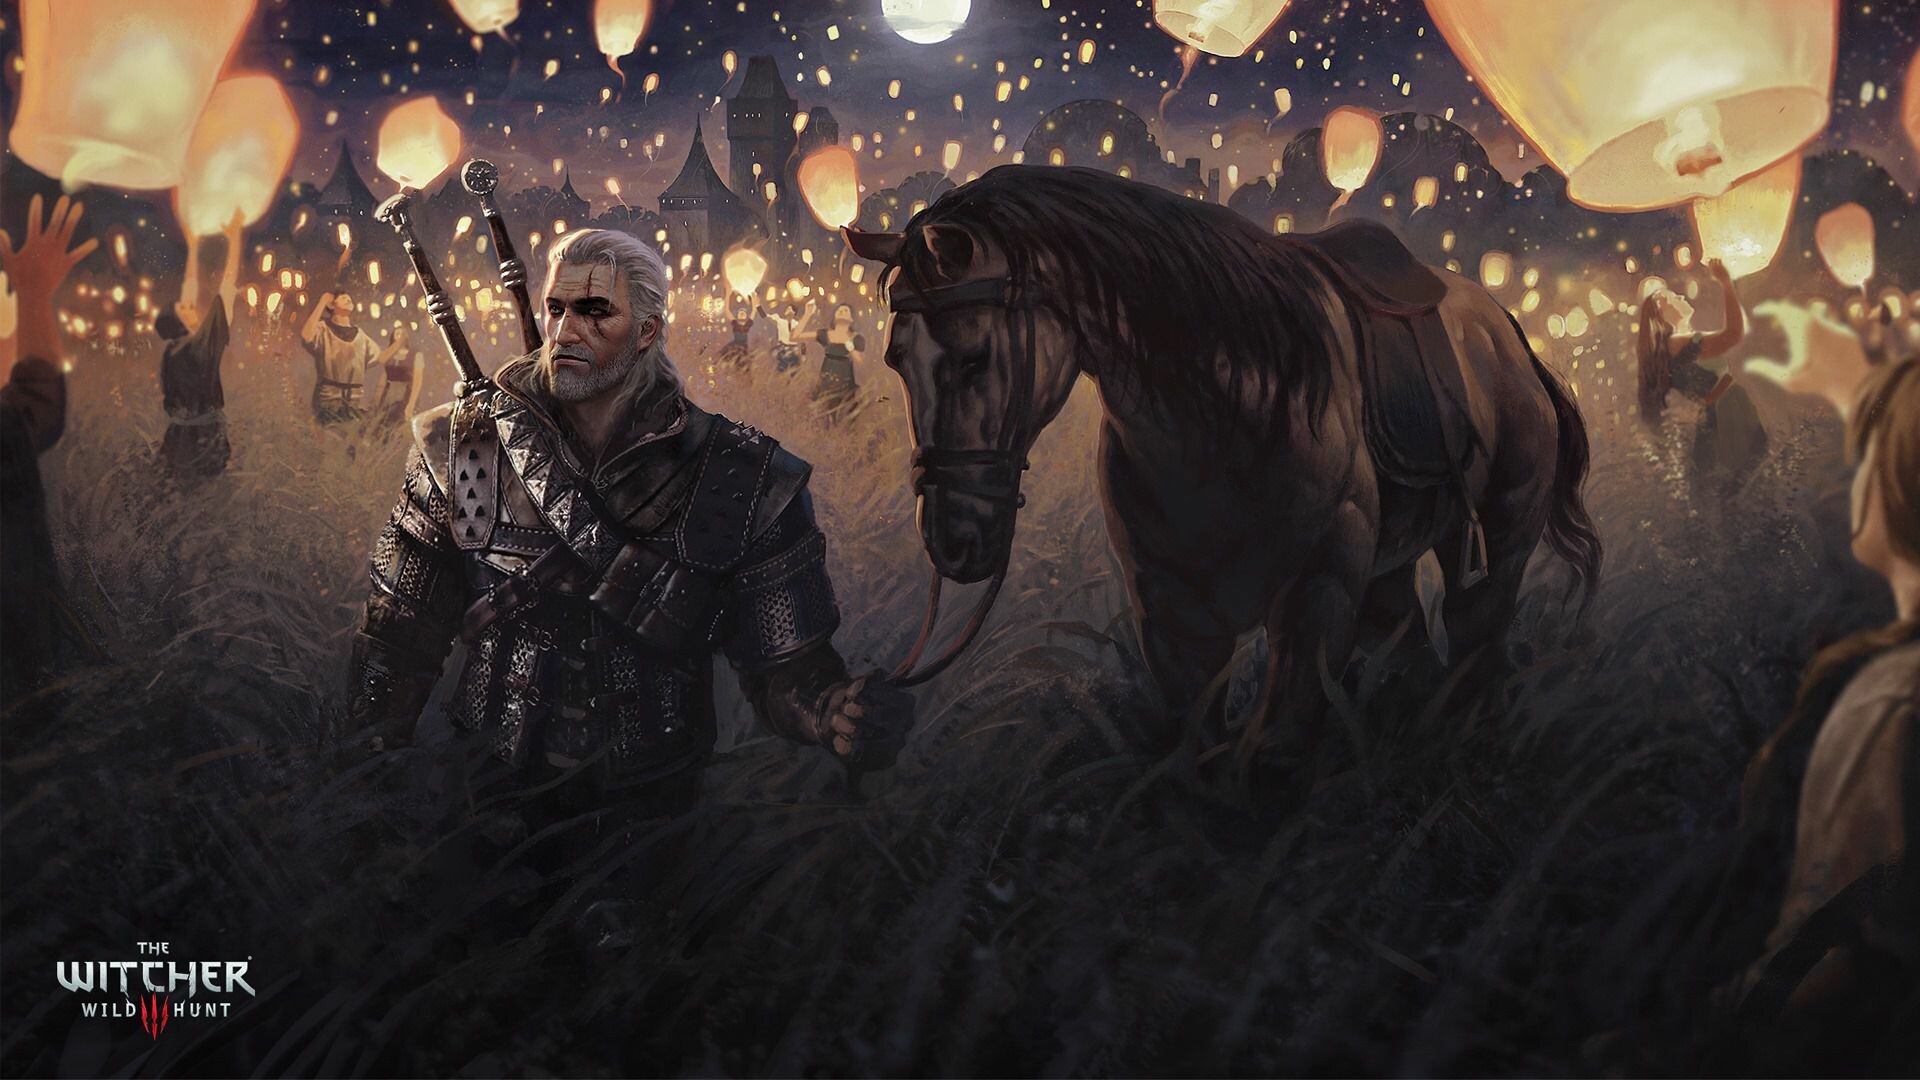 The Witcher (Game): Geralt's adventures continue in a non-canonical version by CD Projekt Red's video game trilogy. 1920x1080 Full HD Wallpaper.